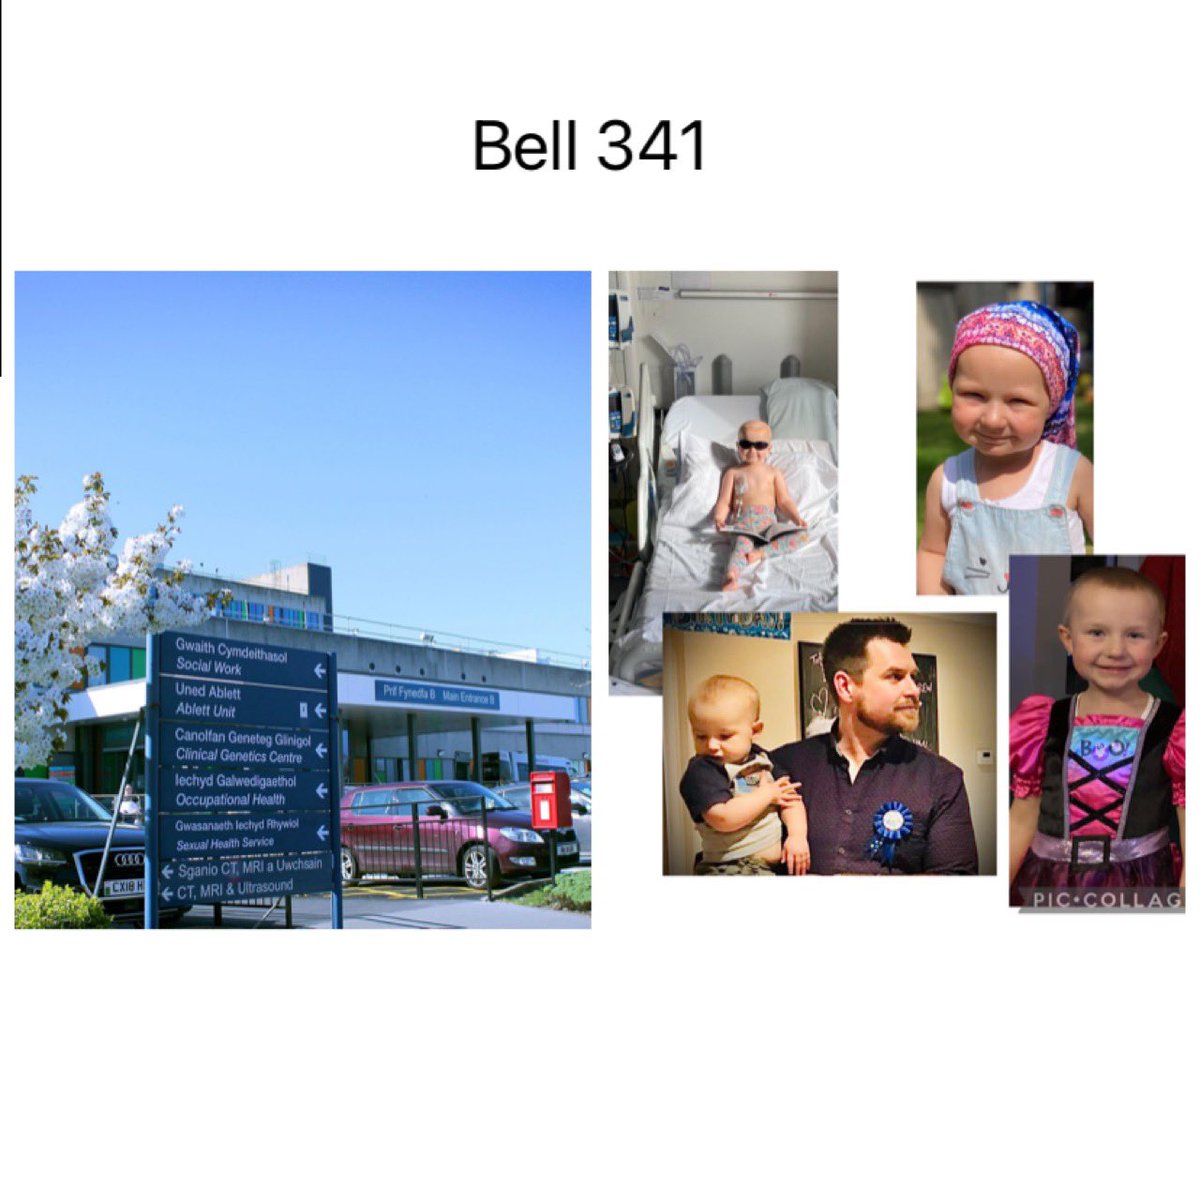 Bell 341 has gone to the North Wales Cancer Centre in Rhyl for use in their radiotherapy department. This bell was sponsored by Tim Lewis for his niece Mary who was diagnosed with Hepatoblastoma in February 2021. She was cared for by the team at Manchester Children’s hospital